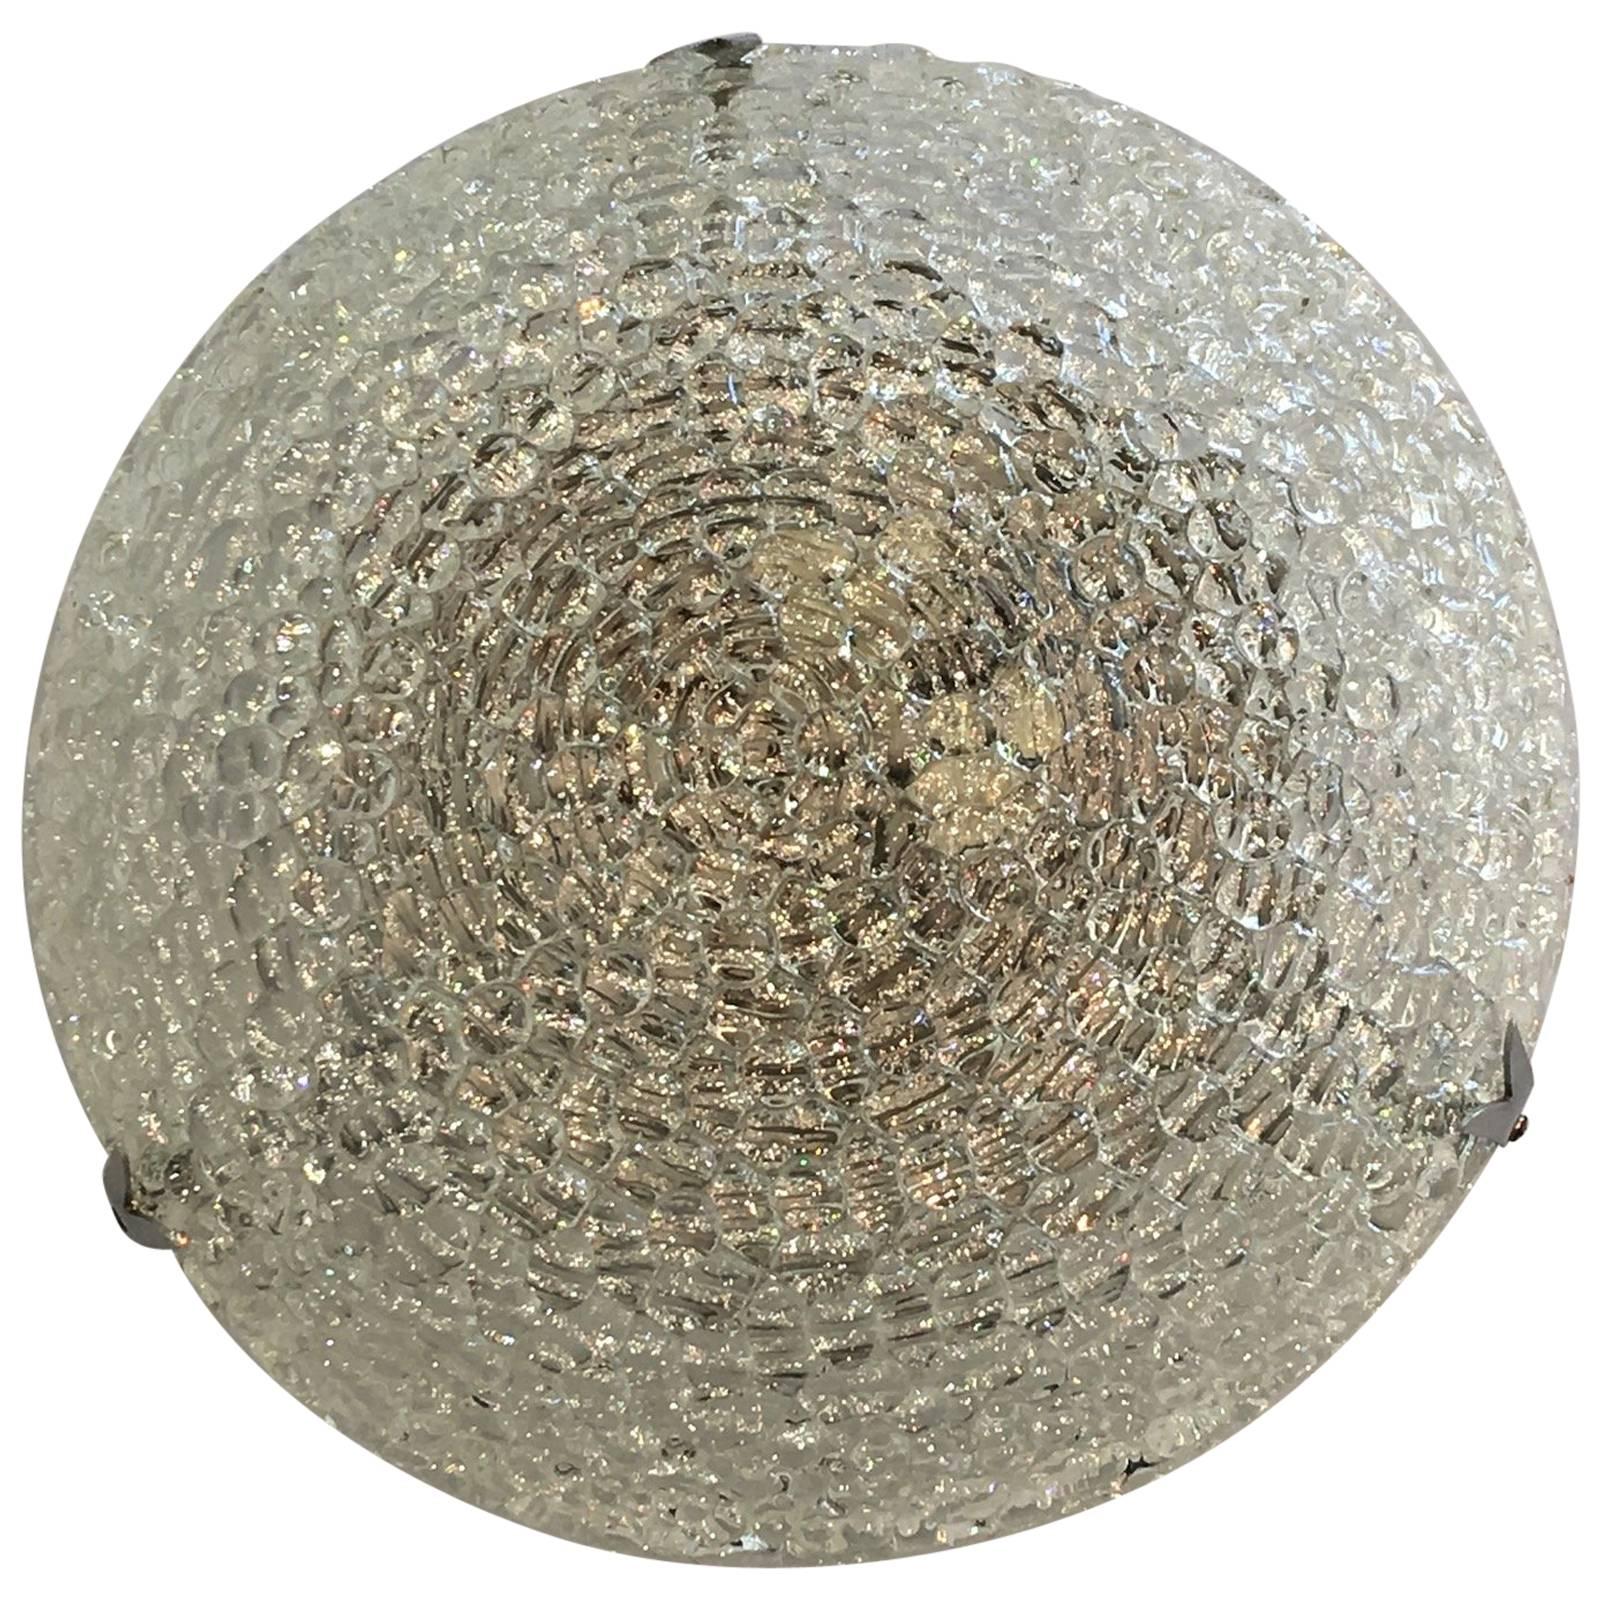 Massive Textured Glass Flush Mount with Chrome Hardware For Sale